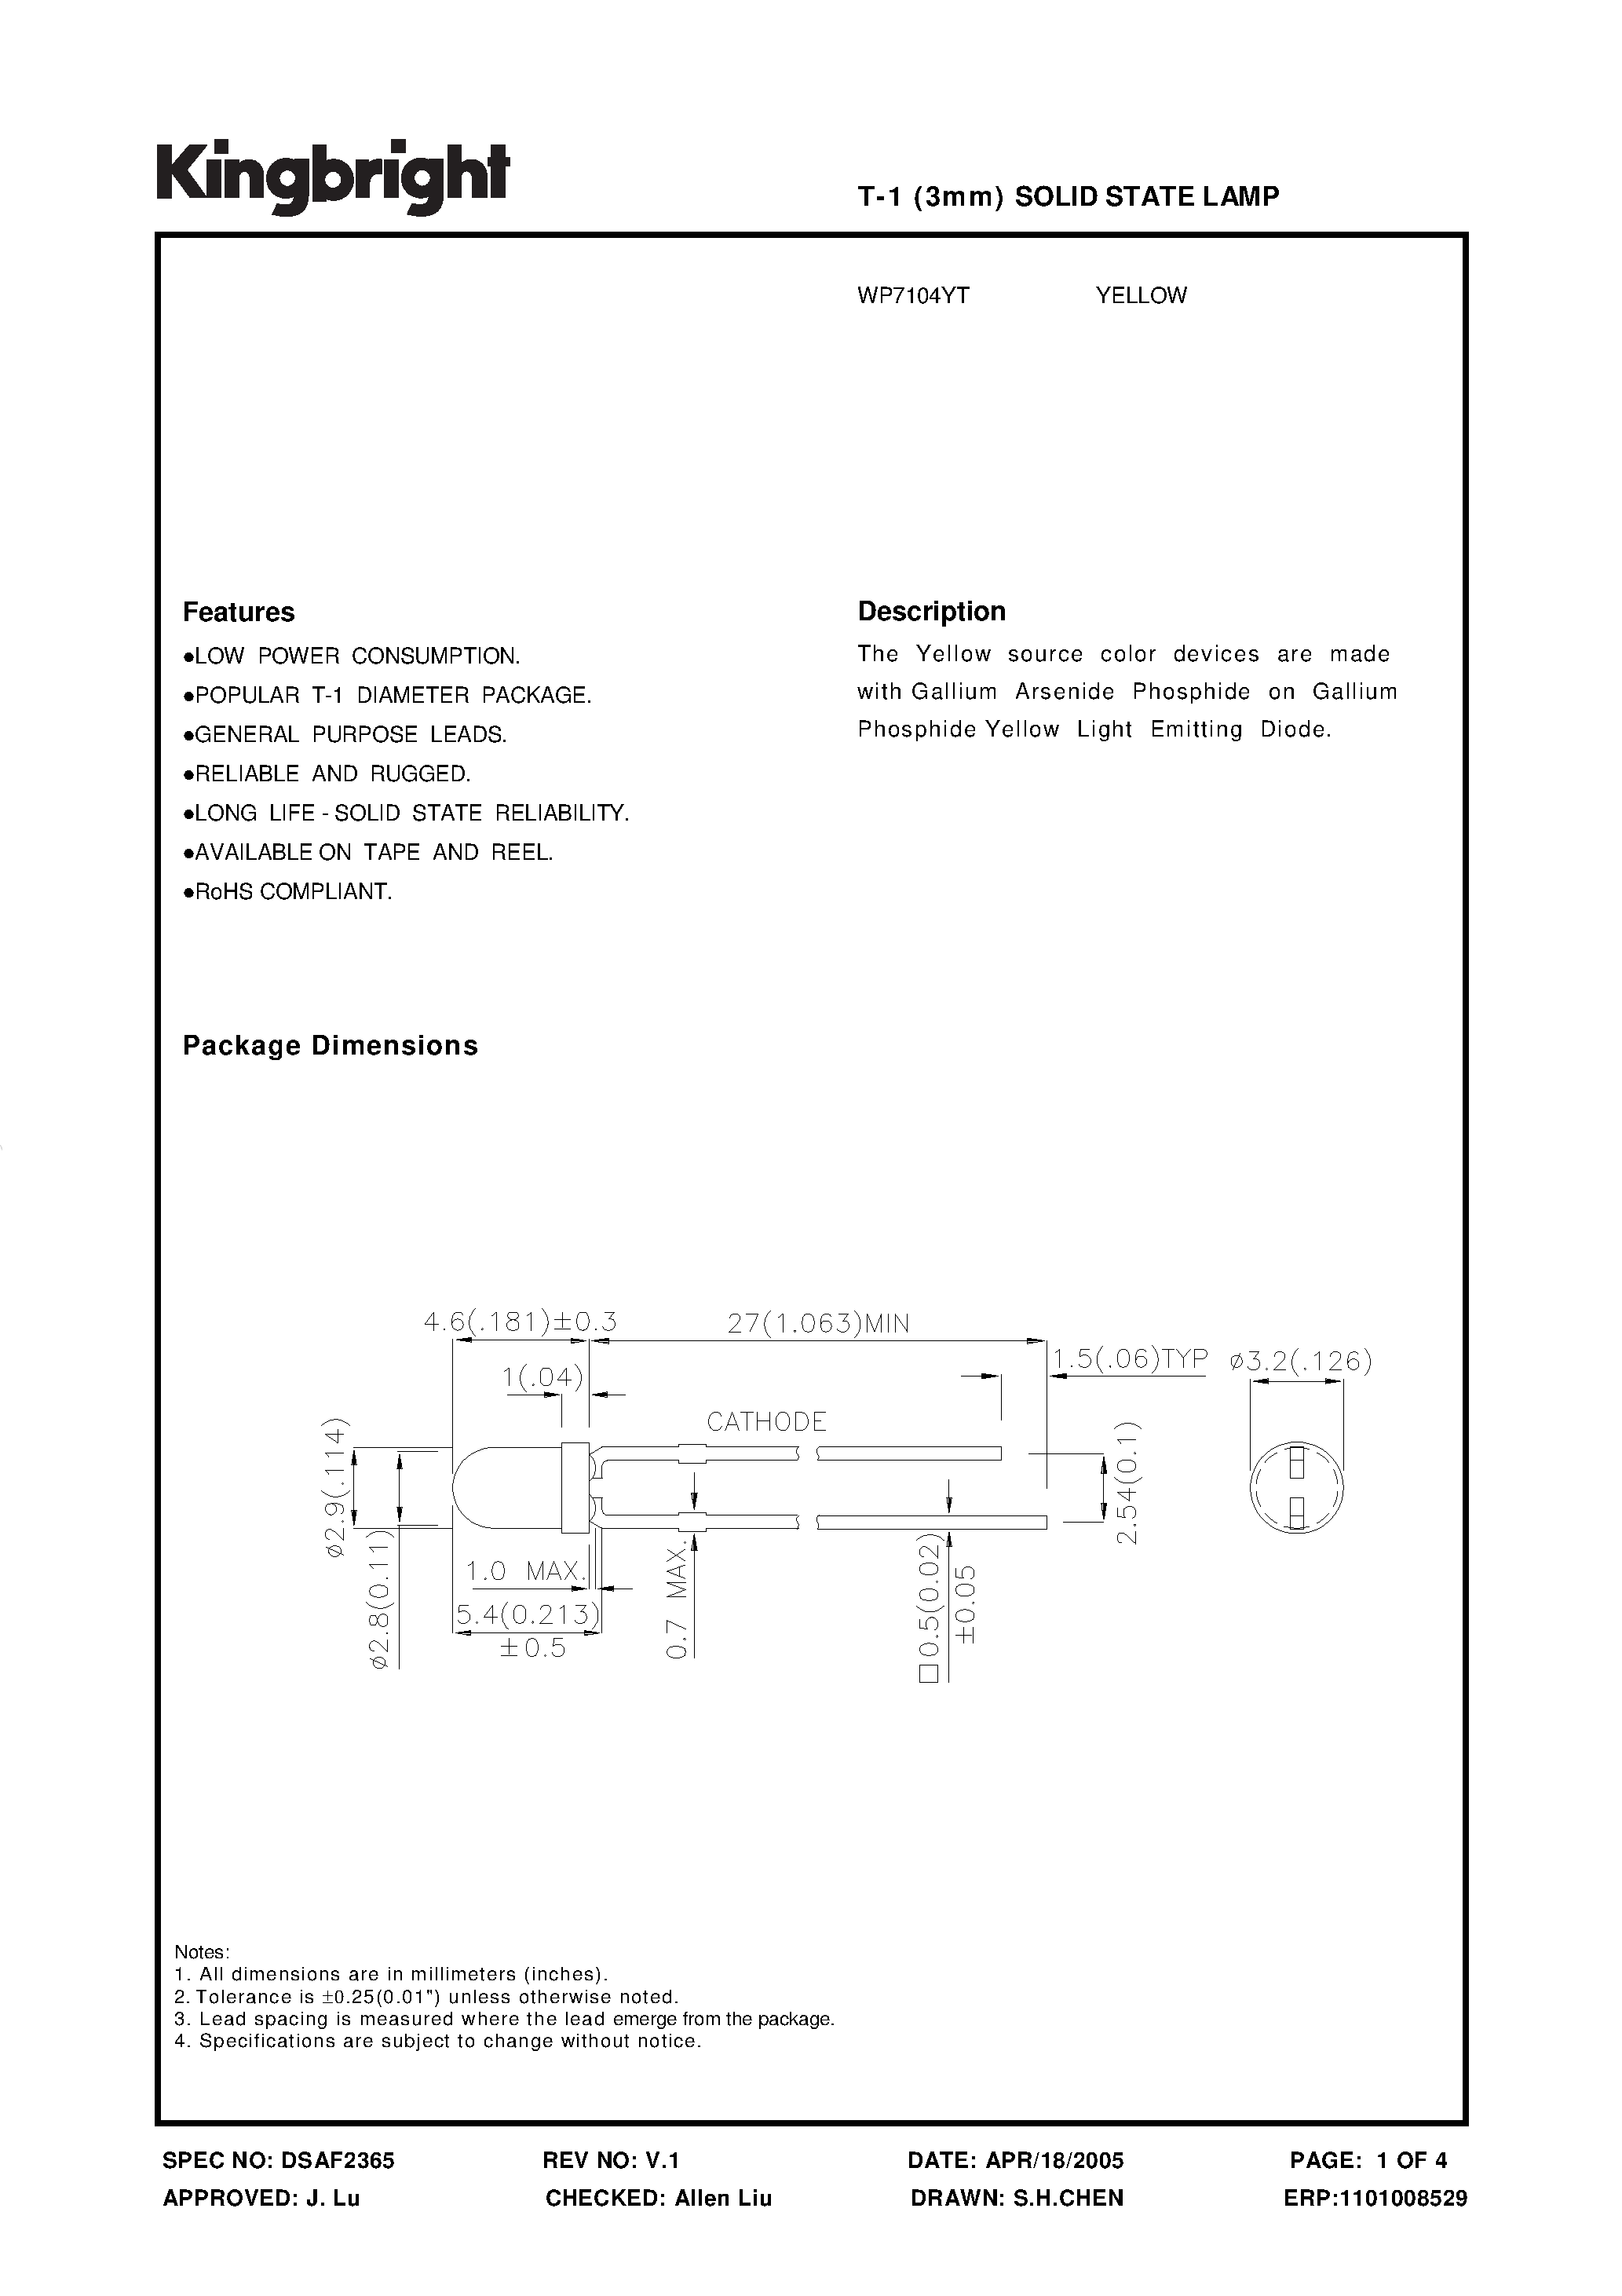 Datasheet WP7104YT - SOLID STATE LAMP page 1